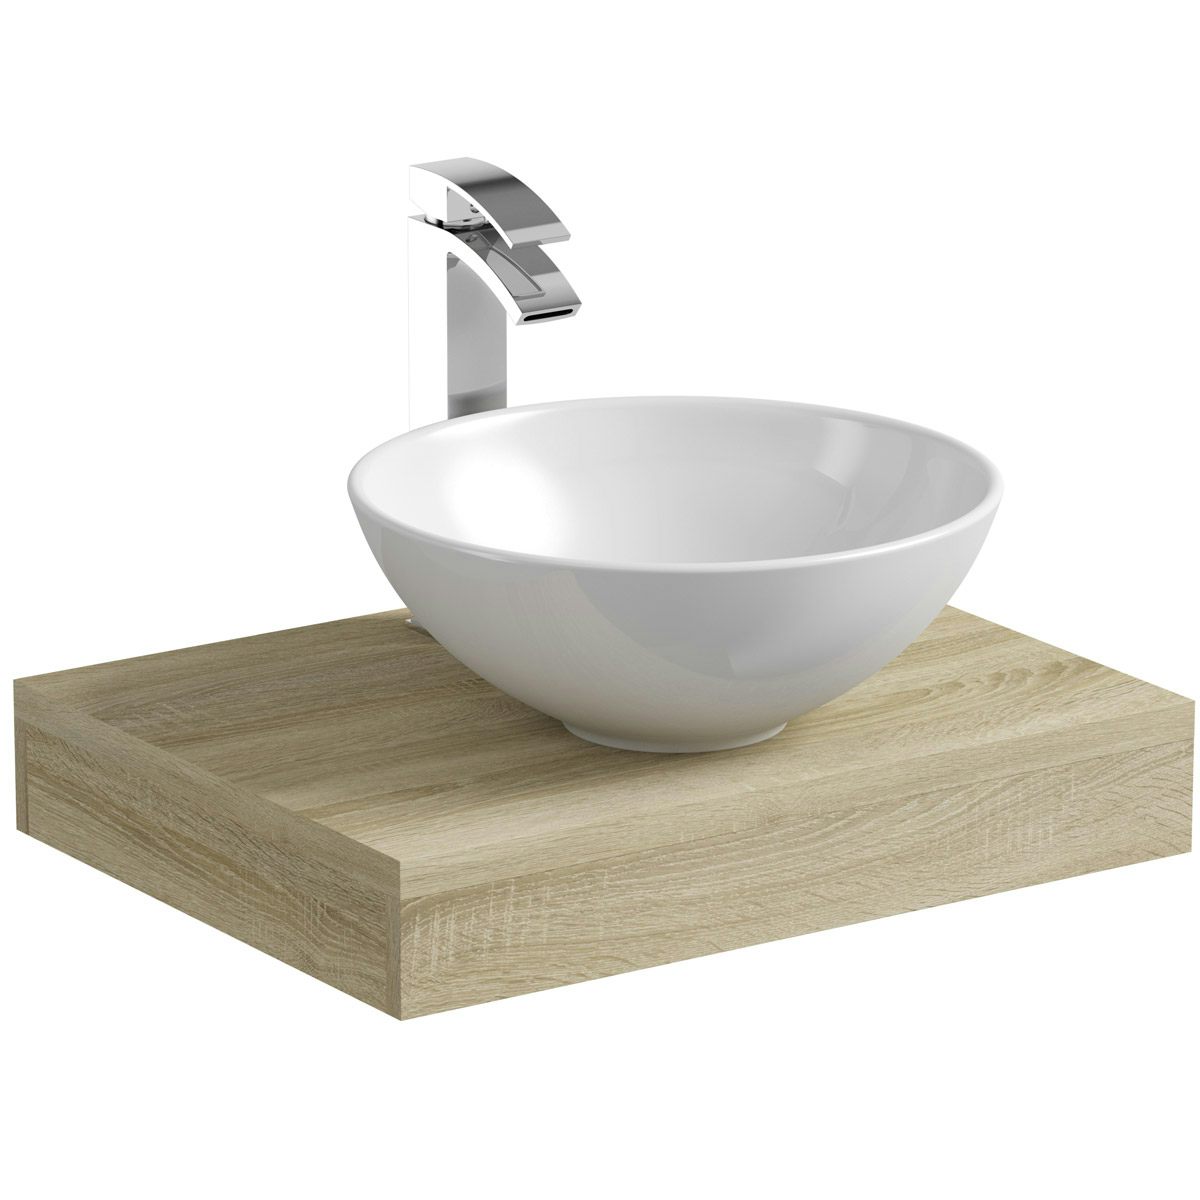 Mode Orion oak countertop shelf 600mm with Derwent countertop basin, tap and waste